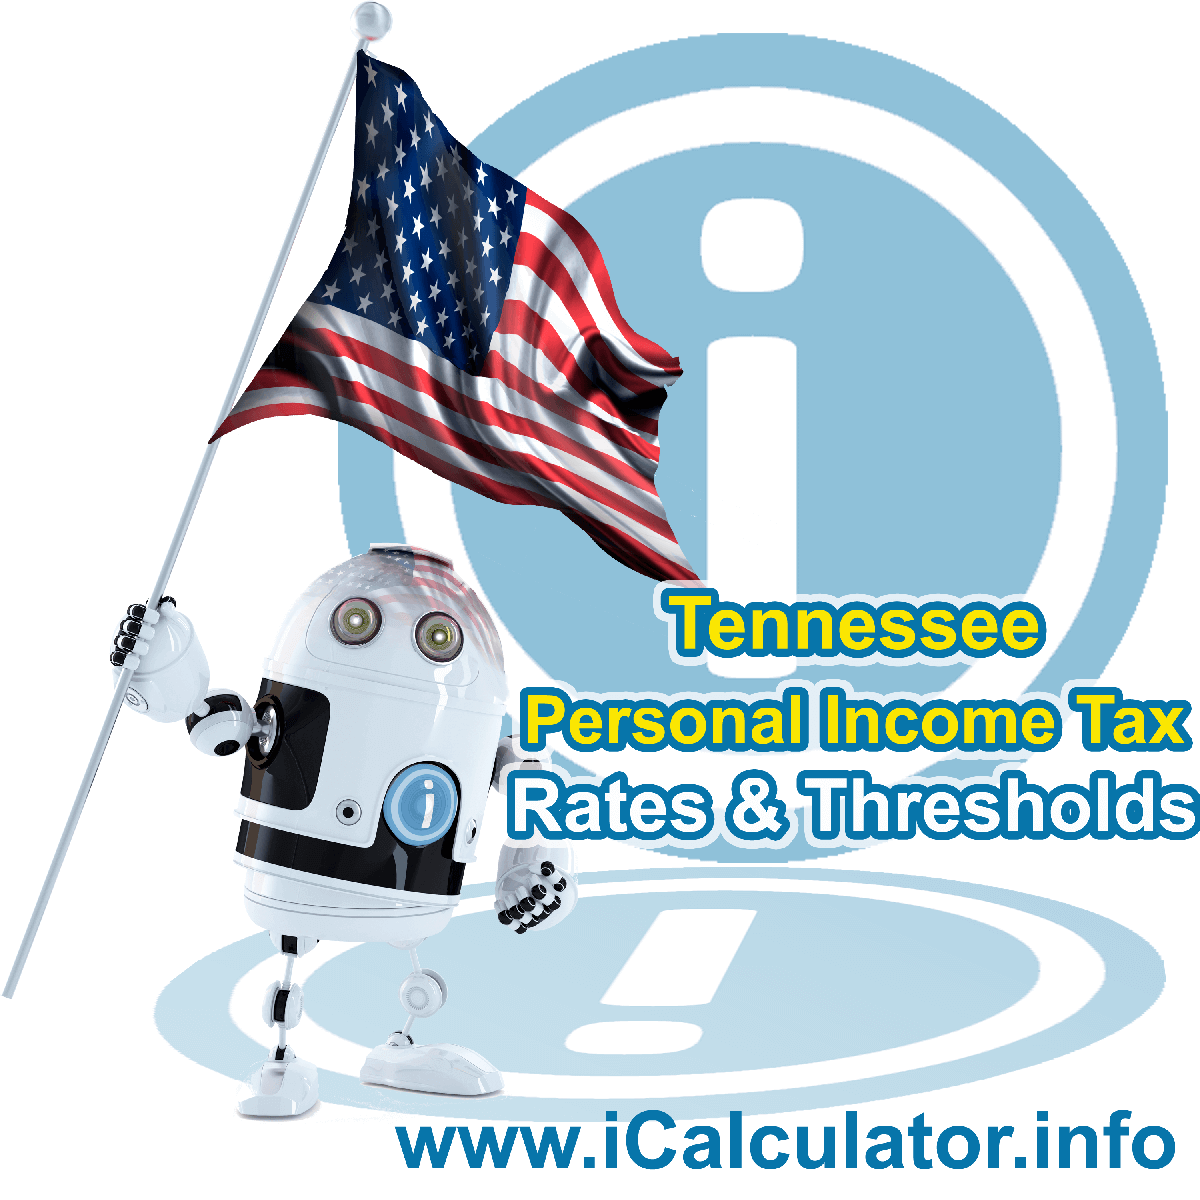 Tennessee State Tax Tables 2016. This image displays details of the Tennessee State Tax Tables for the 2016 tax return year which is provided in support of the 2016 US Tax Calculator